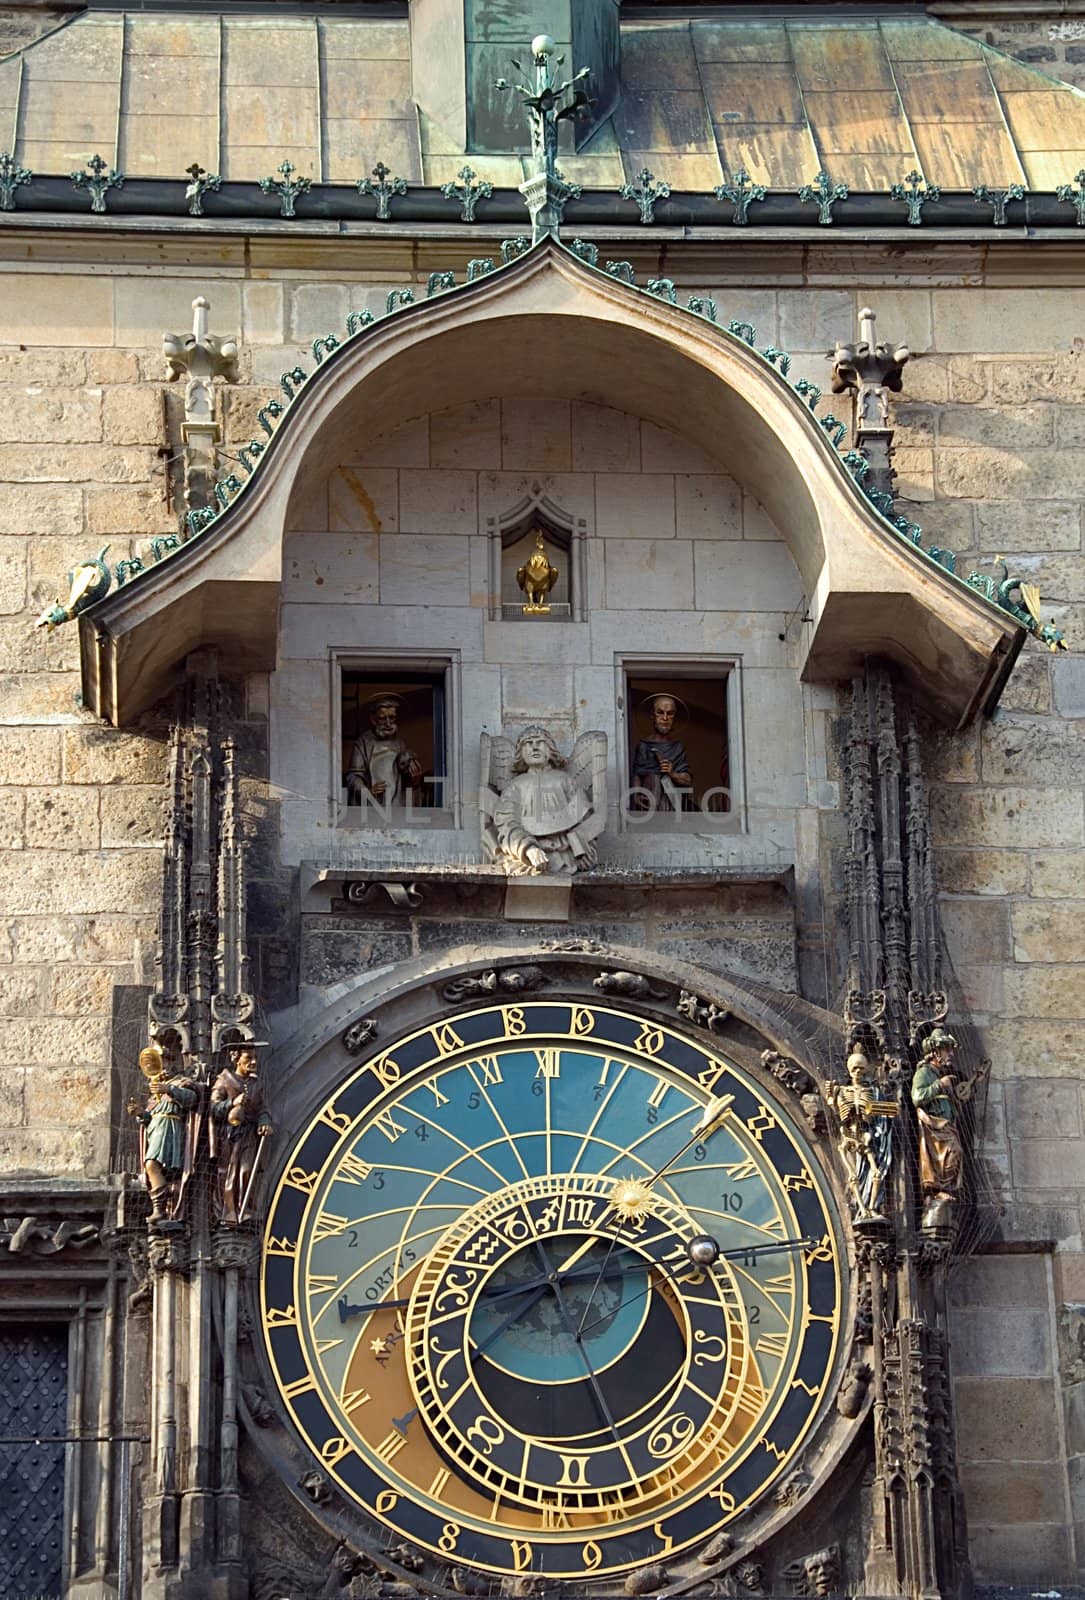 Famous astronomical clock on the Old town square in Prague